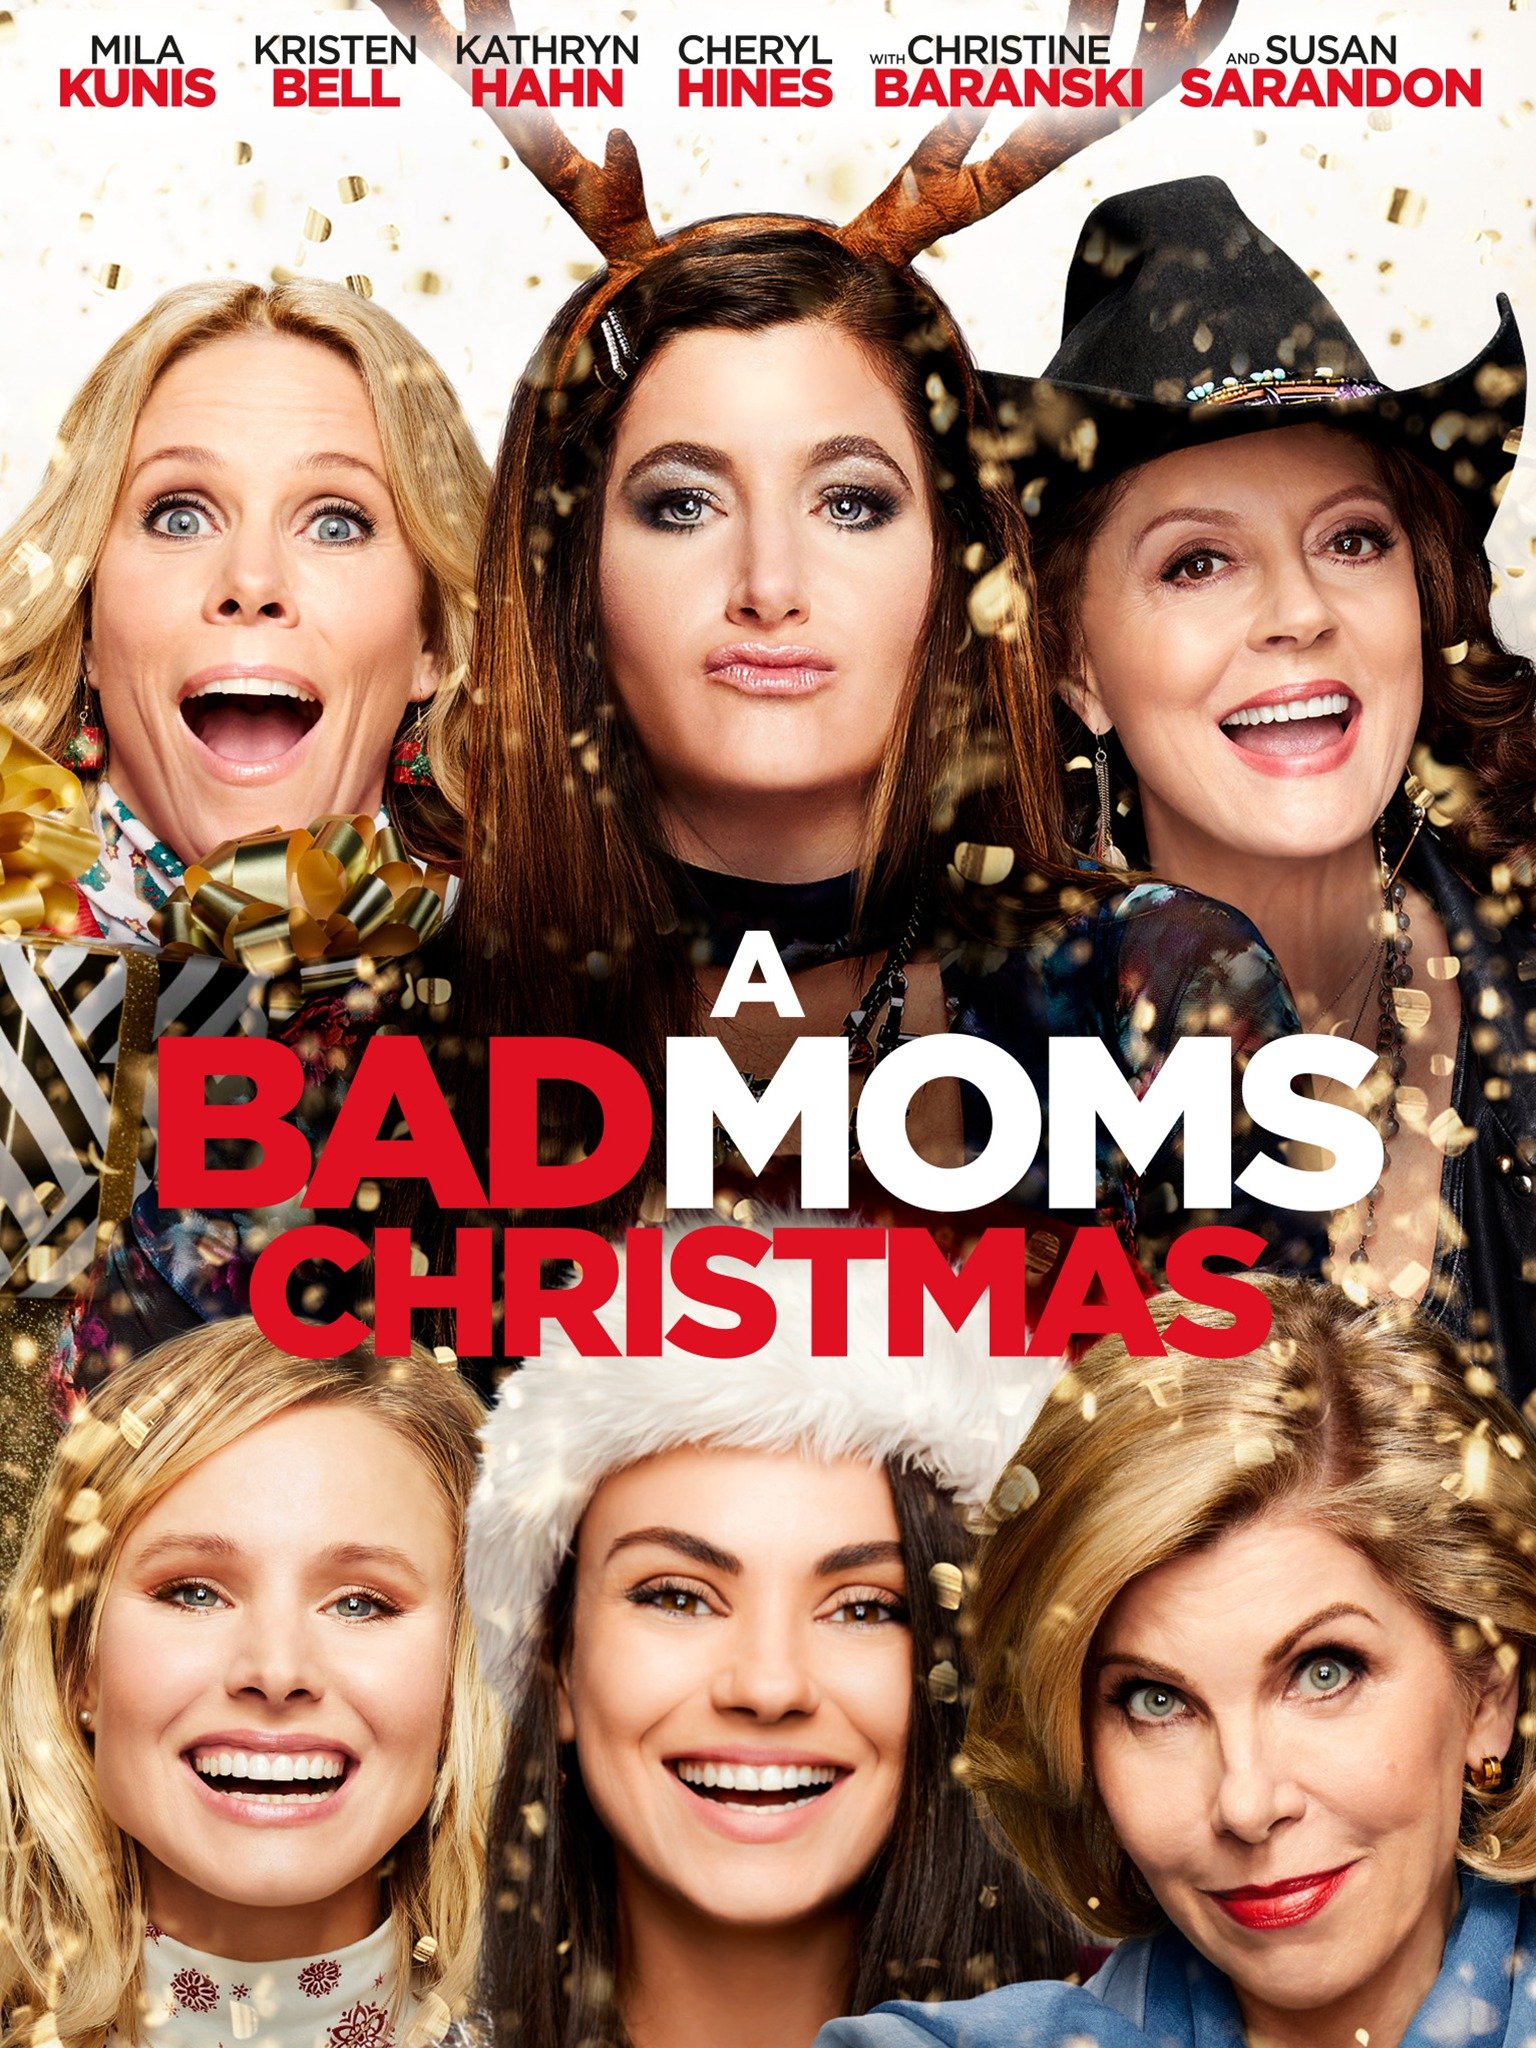 A Bad Moms Christmas Trailer 1 Trailers Videos Rotten Tomatoes